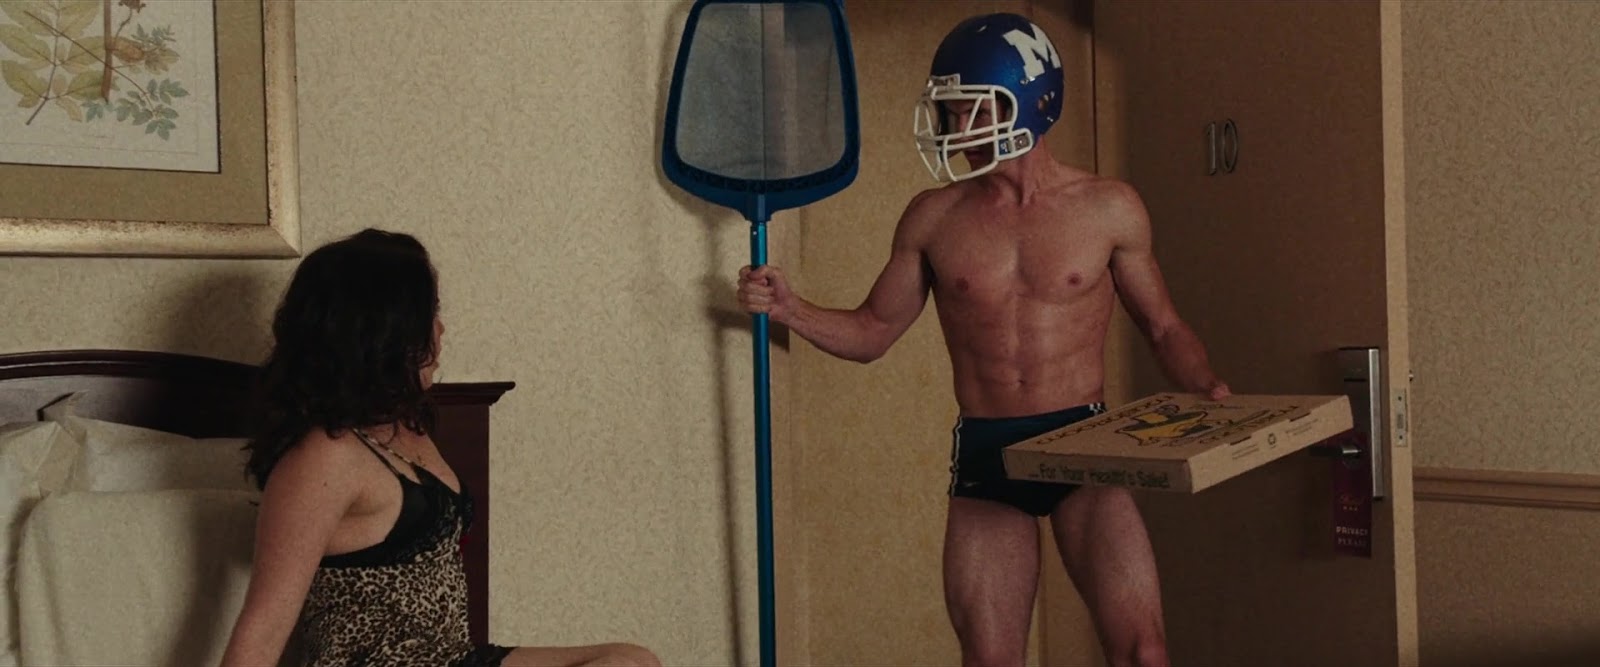 Robbie Amell shirtless in The Duff.